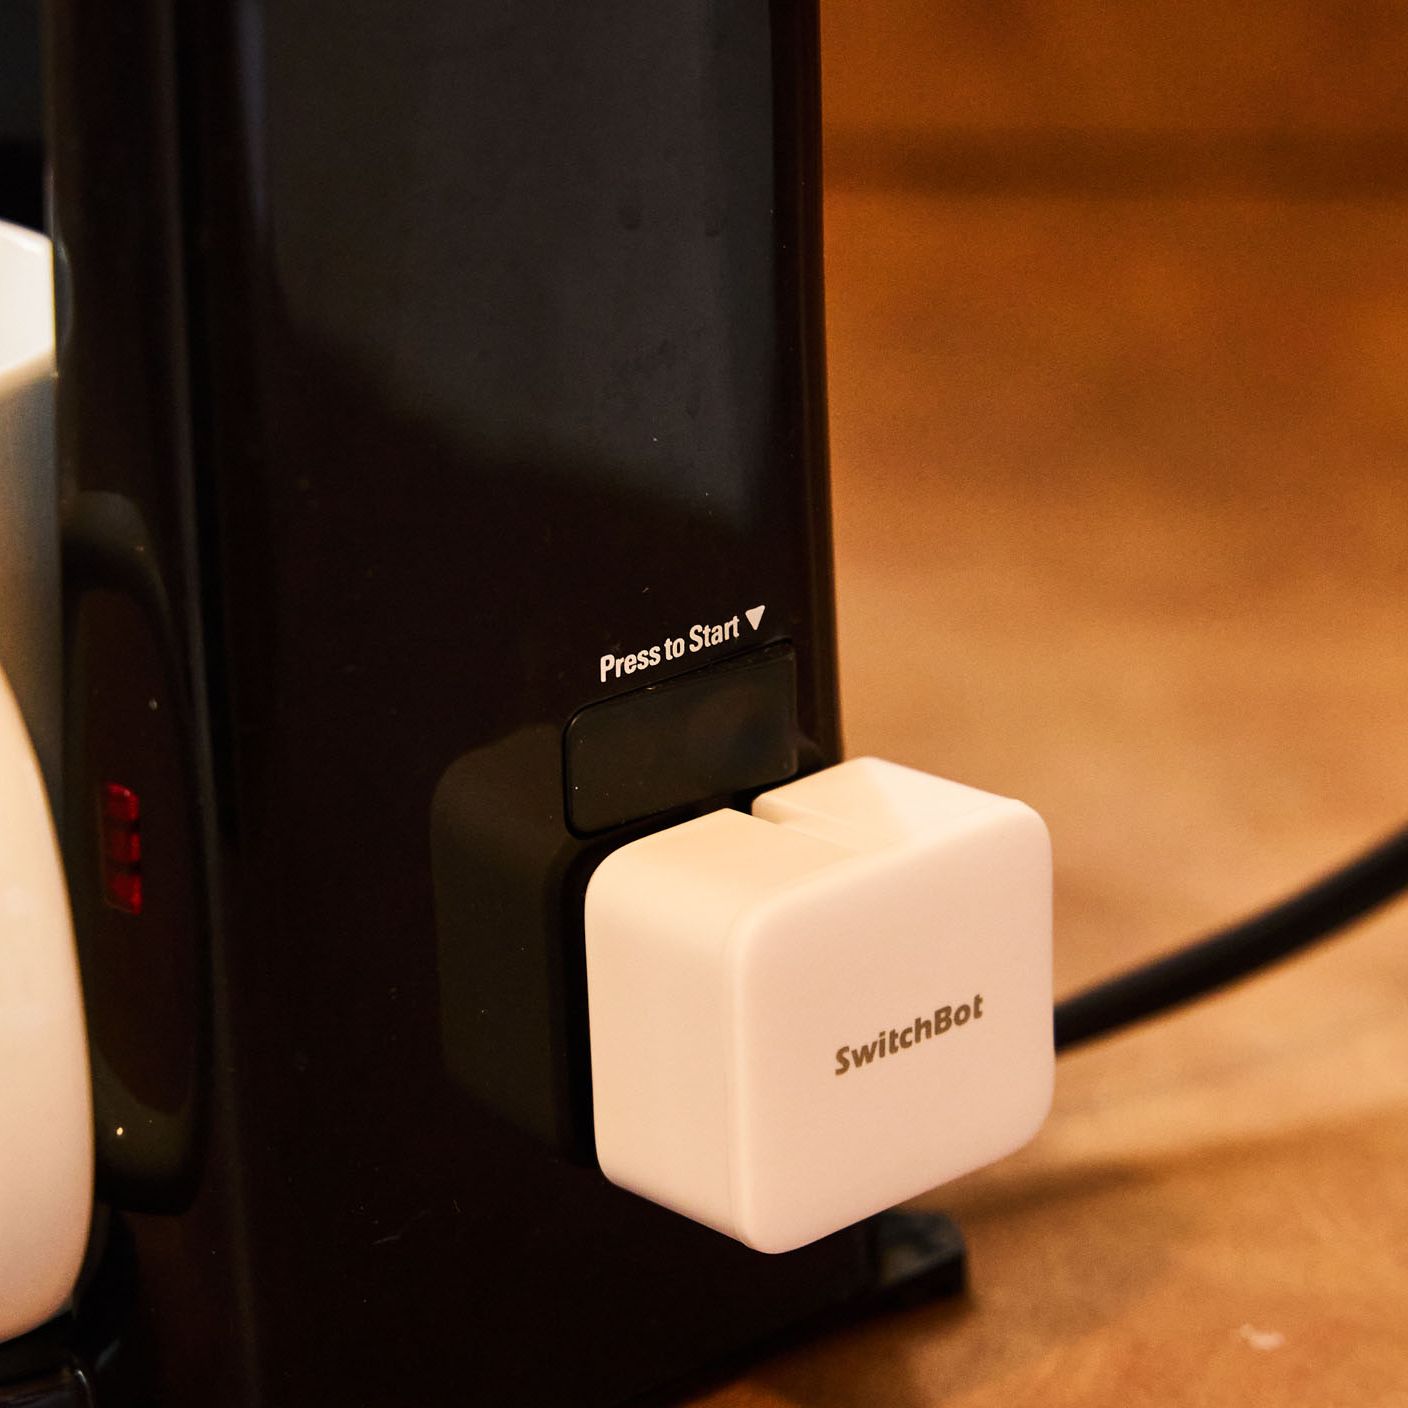 This $29 Gadget Will Make Your Home Smart in Minutes